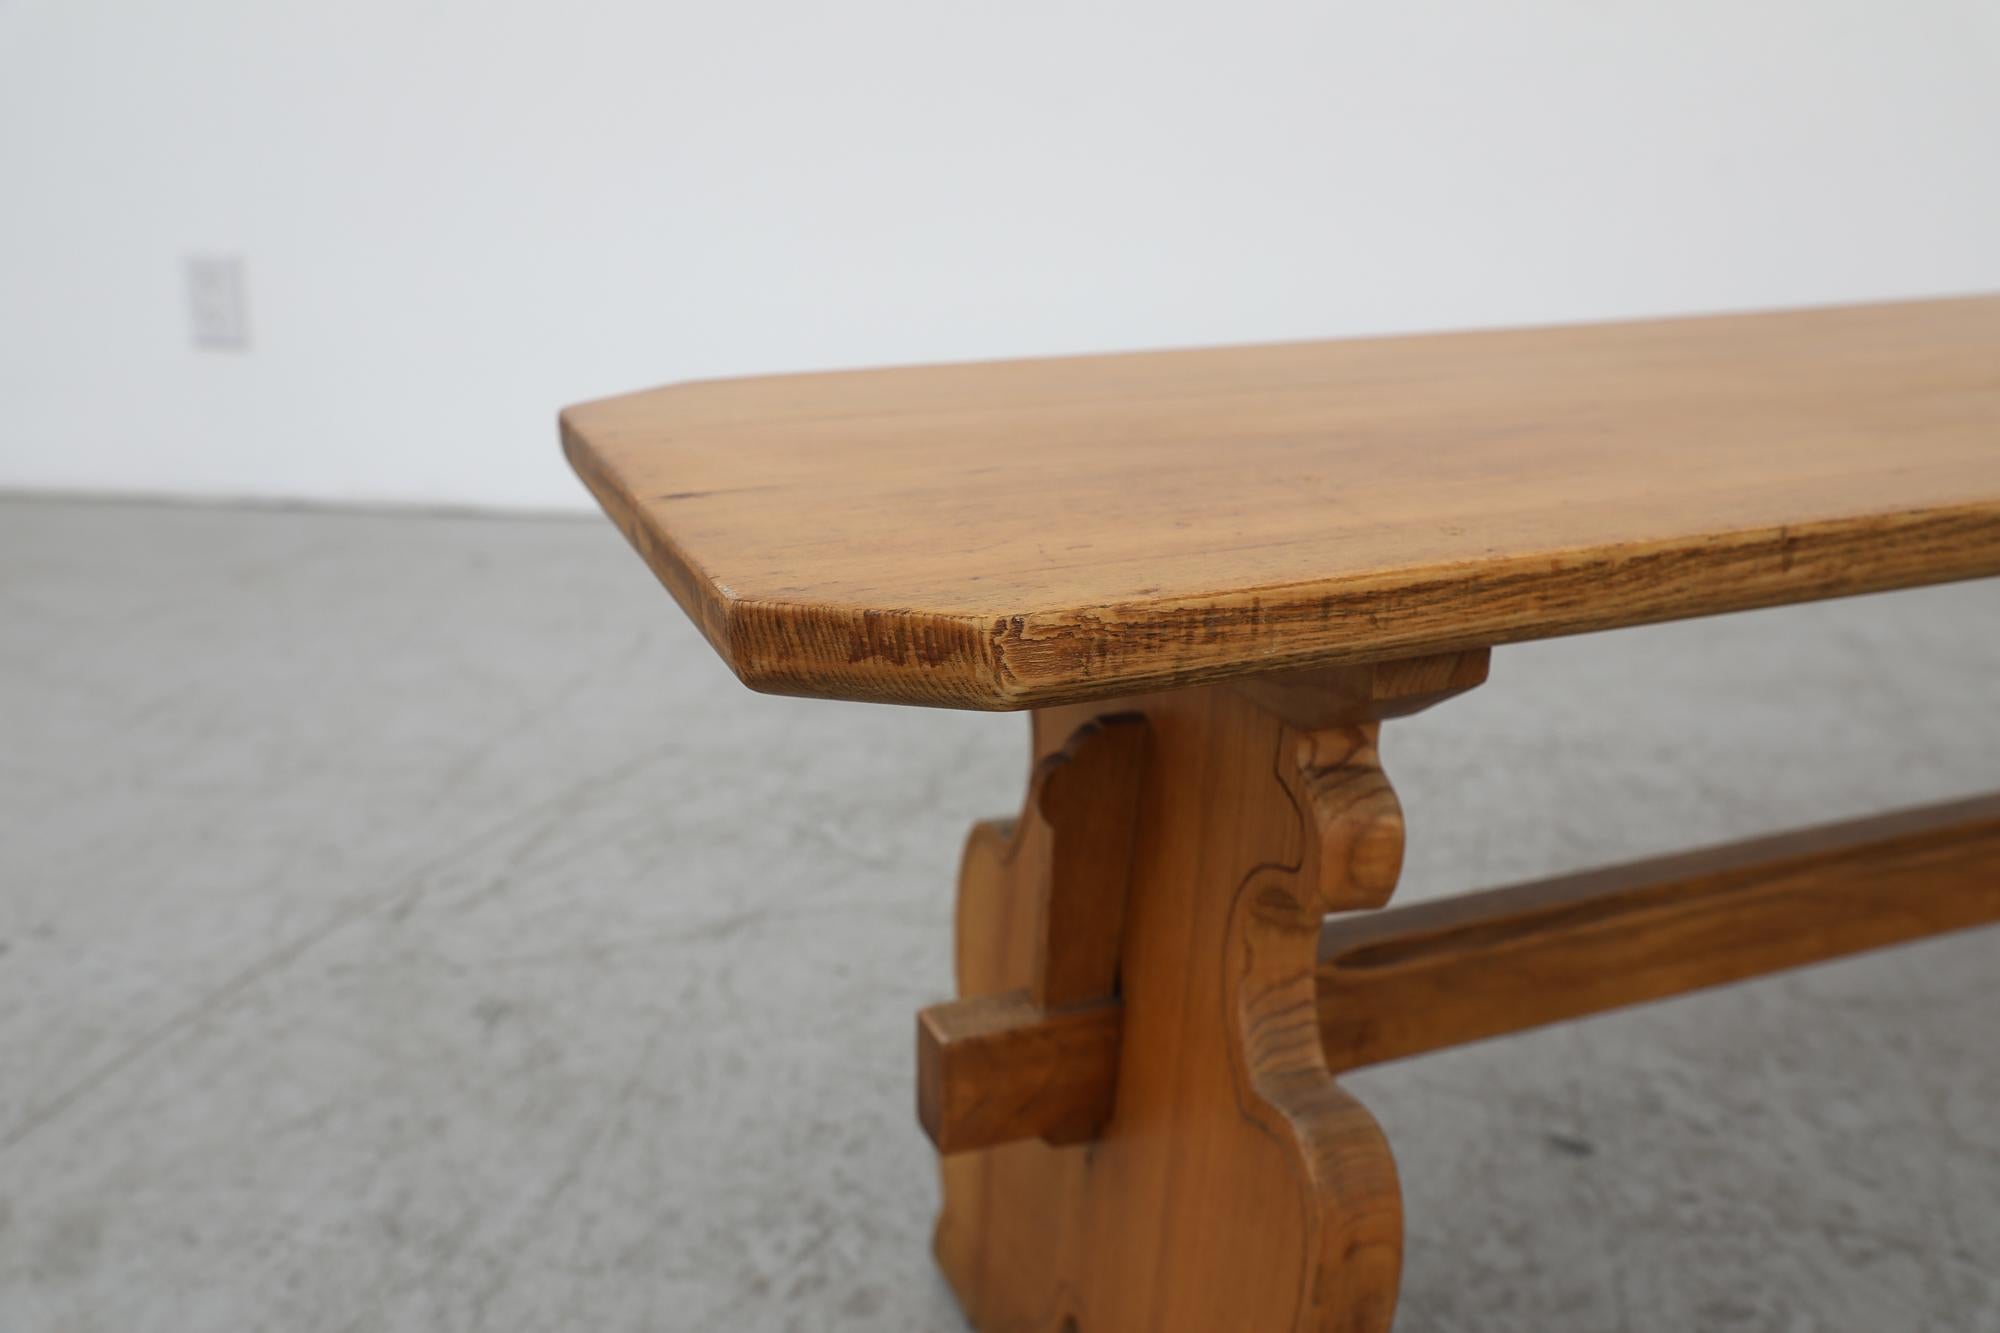 Oak Mid-Century Tyrolean Style Ornate Bench from Austria